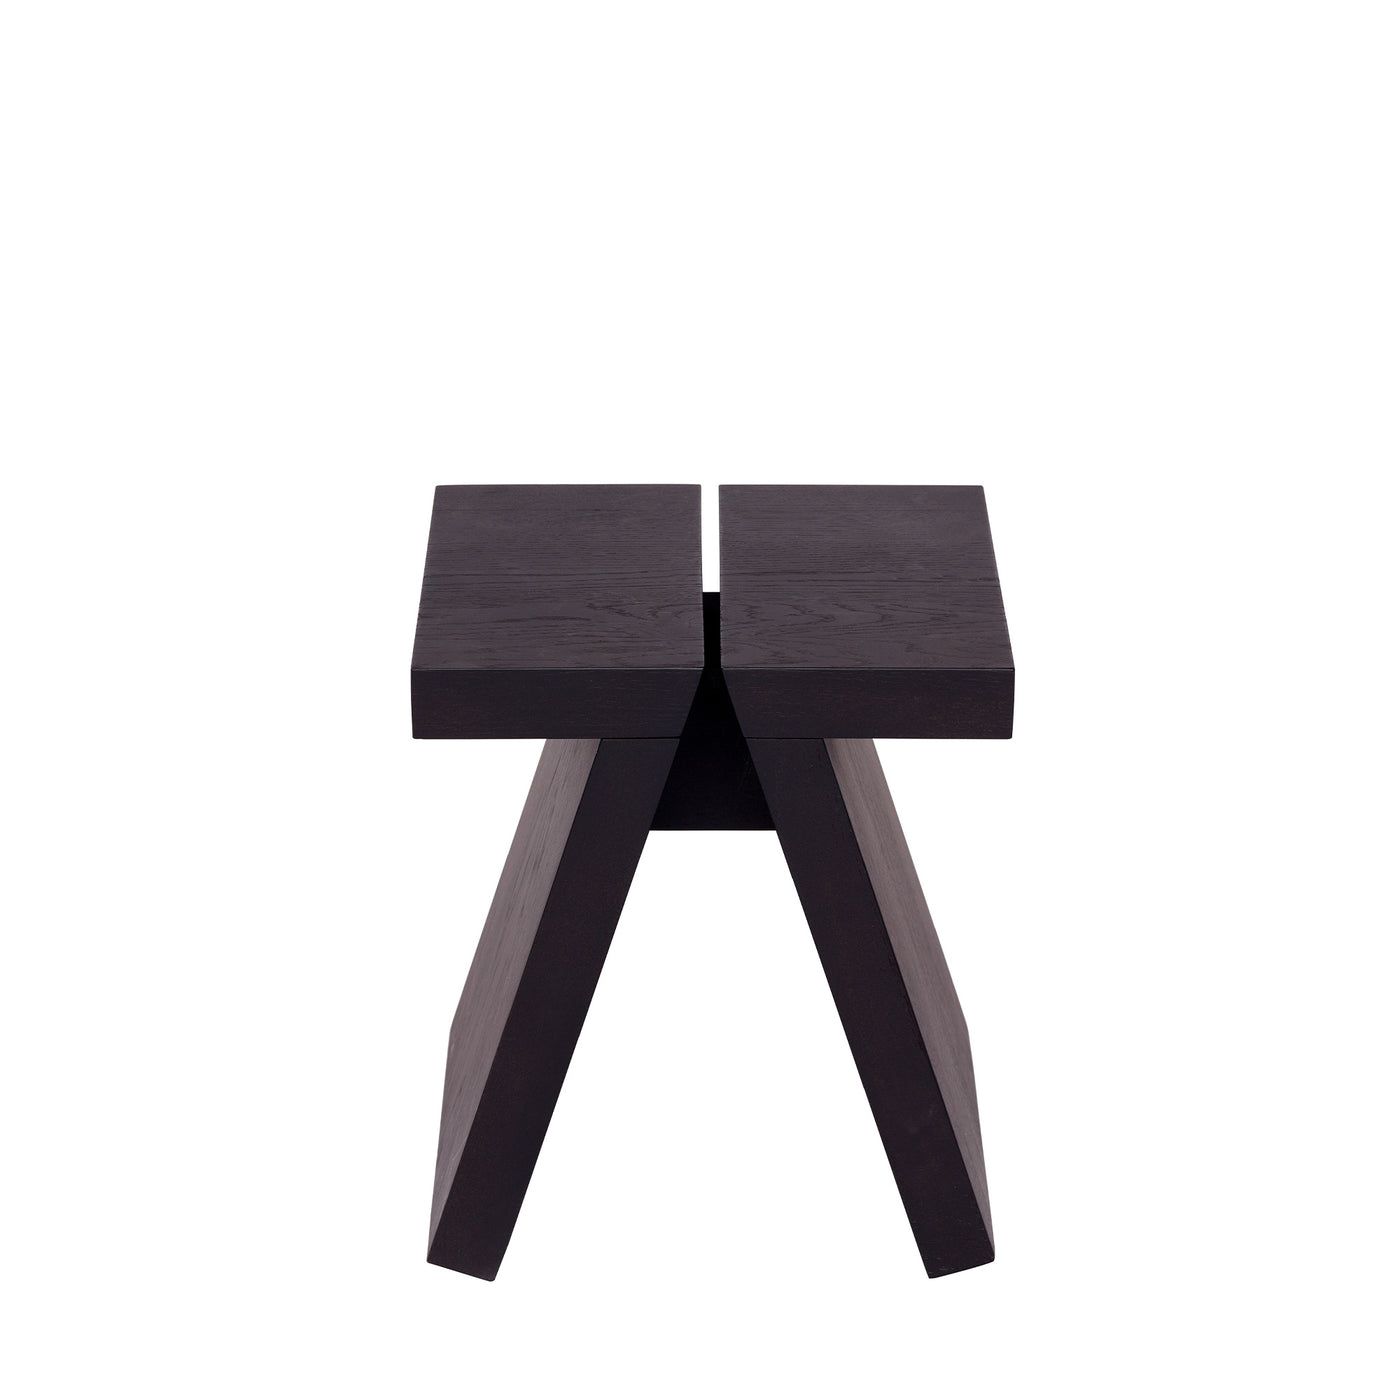 SUPERSOLID folding table